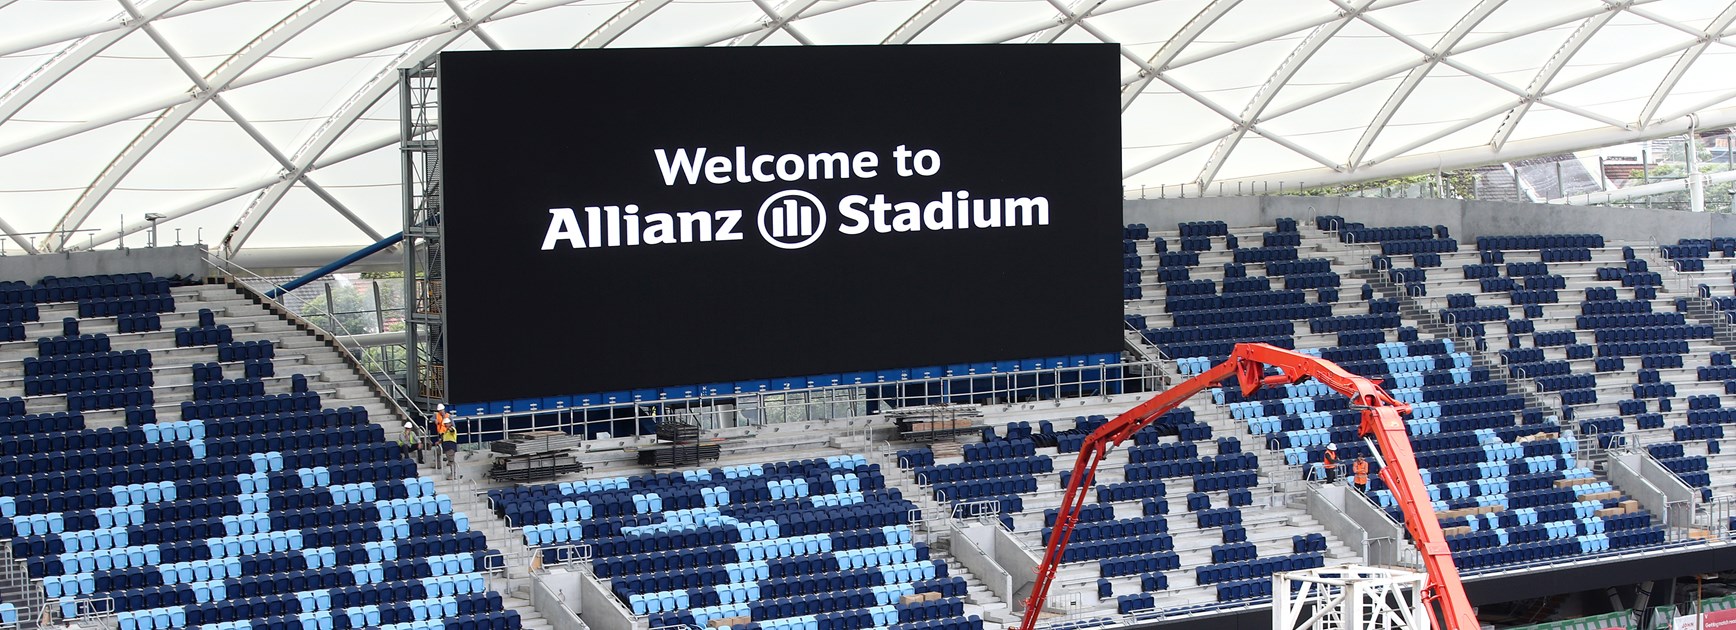 Allianz Stadium Continues SFS Naming Rights